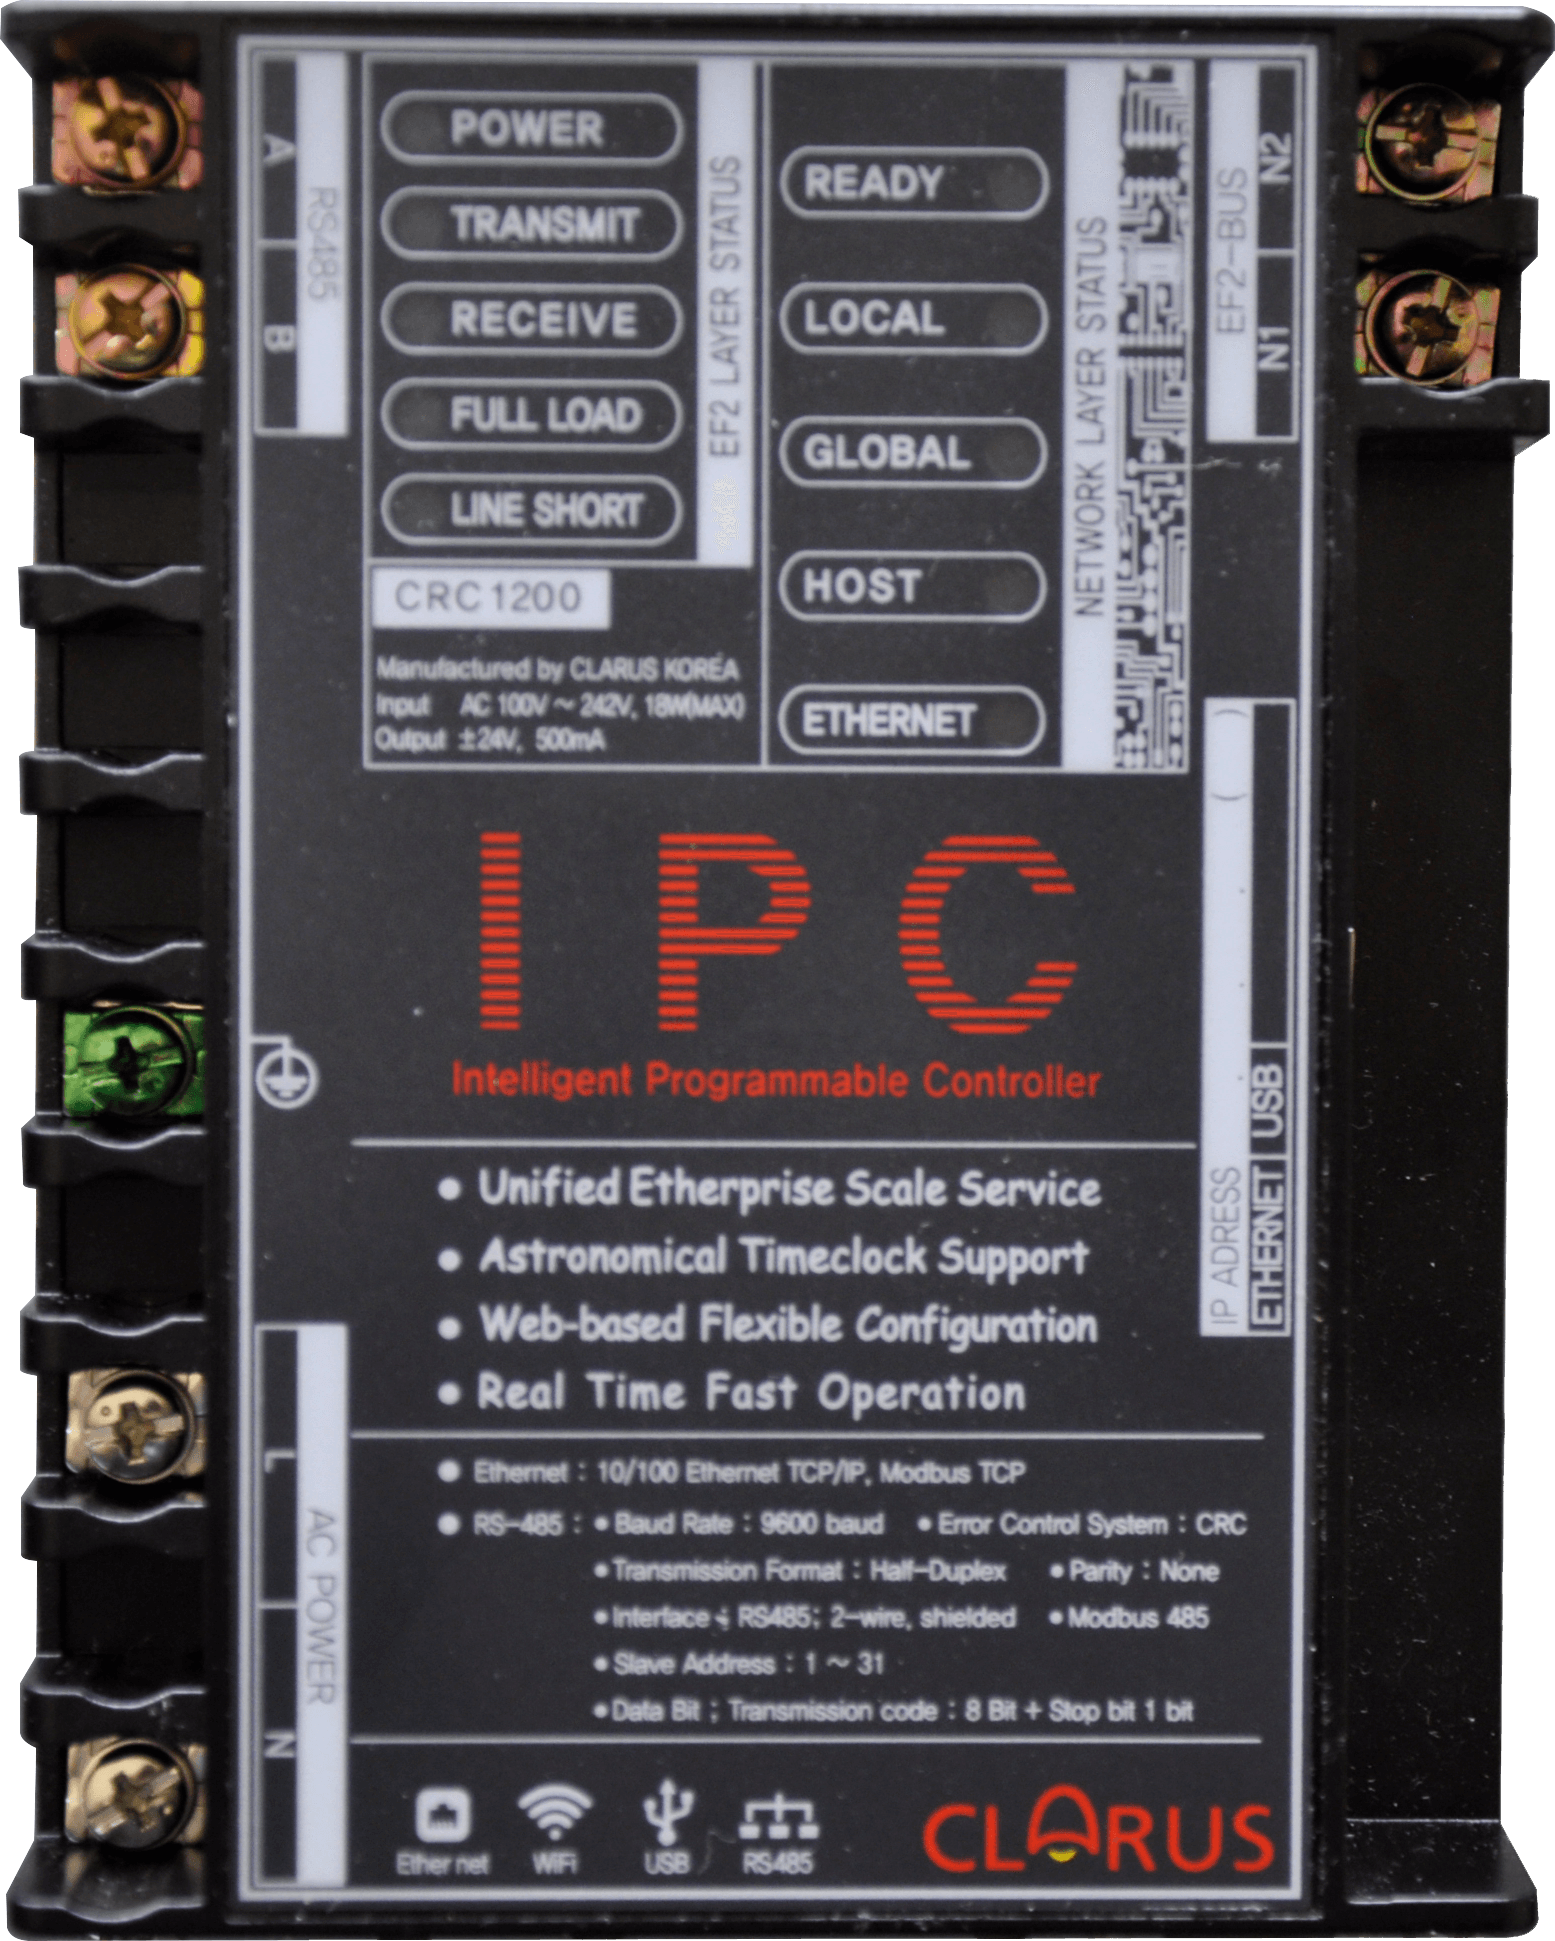 Integrated Programmable Controller (IPC)